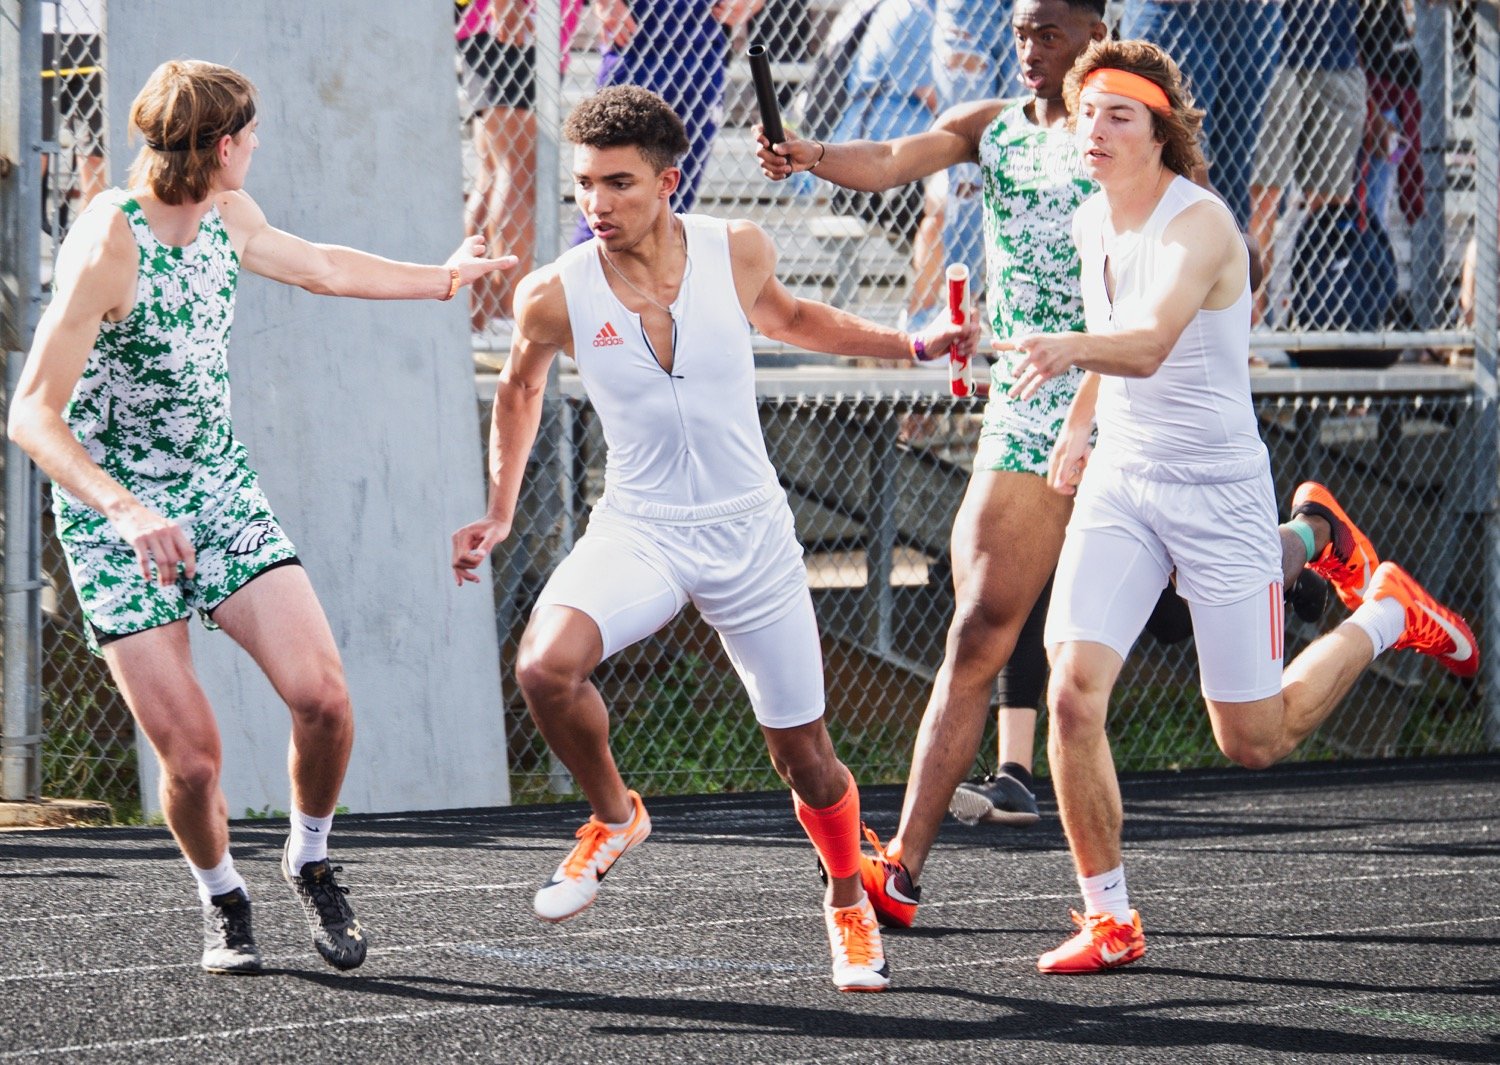 Brady Shrum, right, passes the baton to Jaxon Holland for the second leg of Mineola's 4x400 meter relay, which they won to punch their ticket to state. [view more valiant efforts]